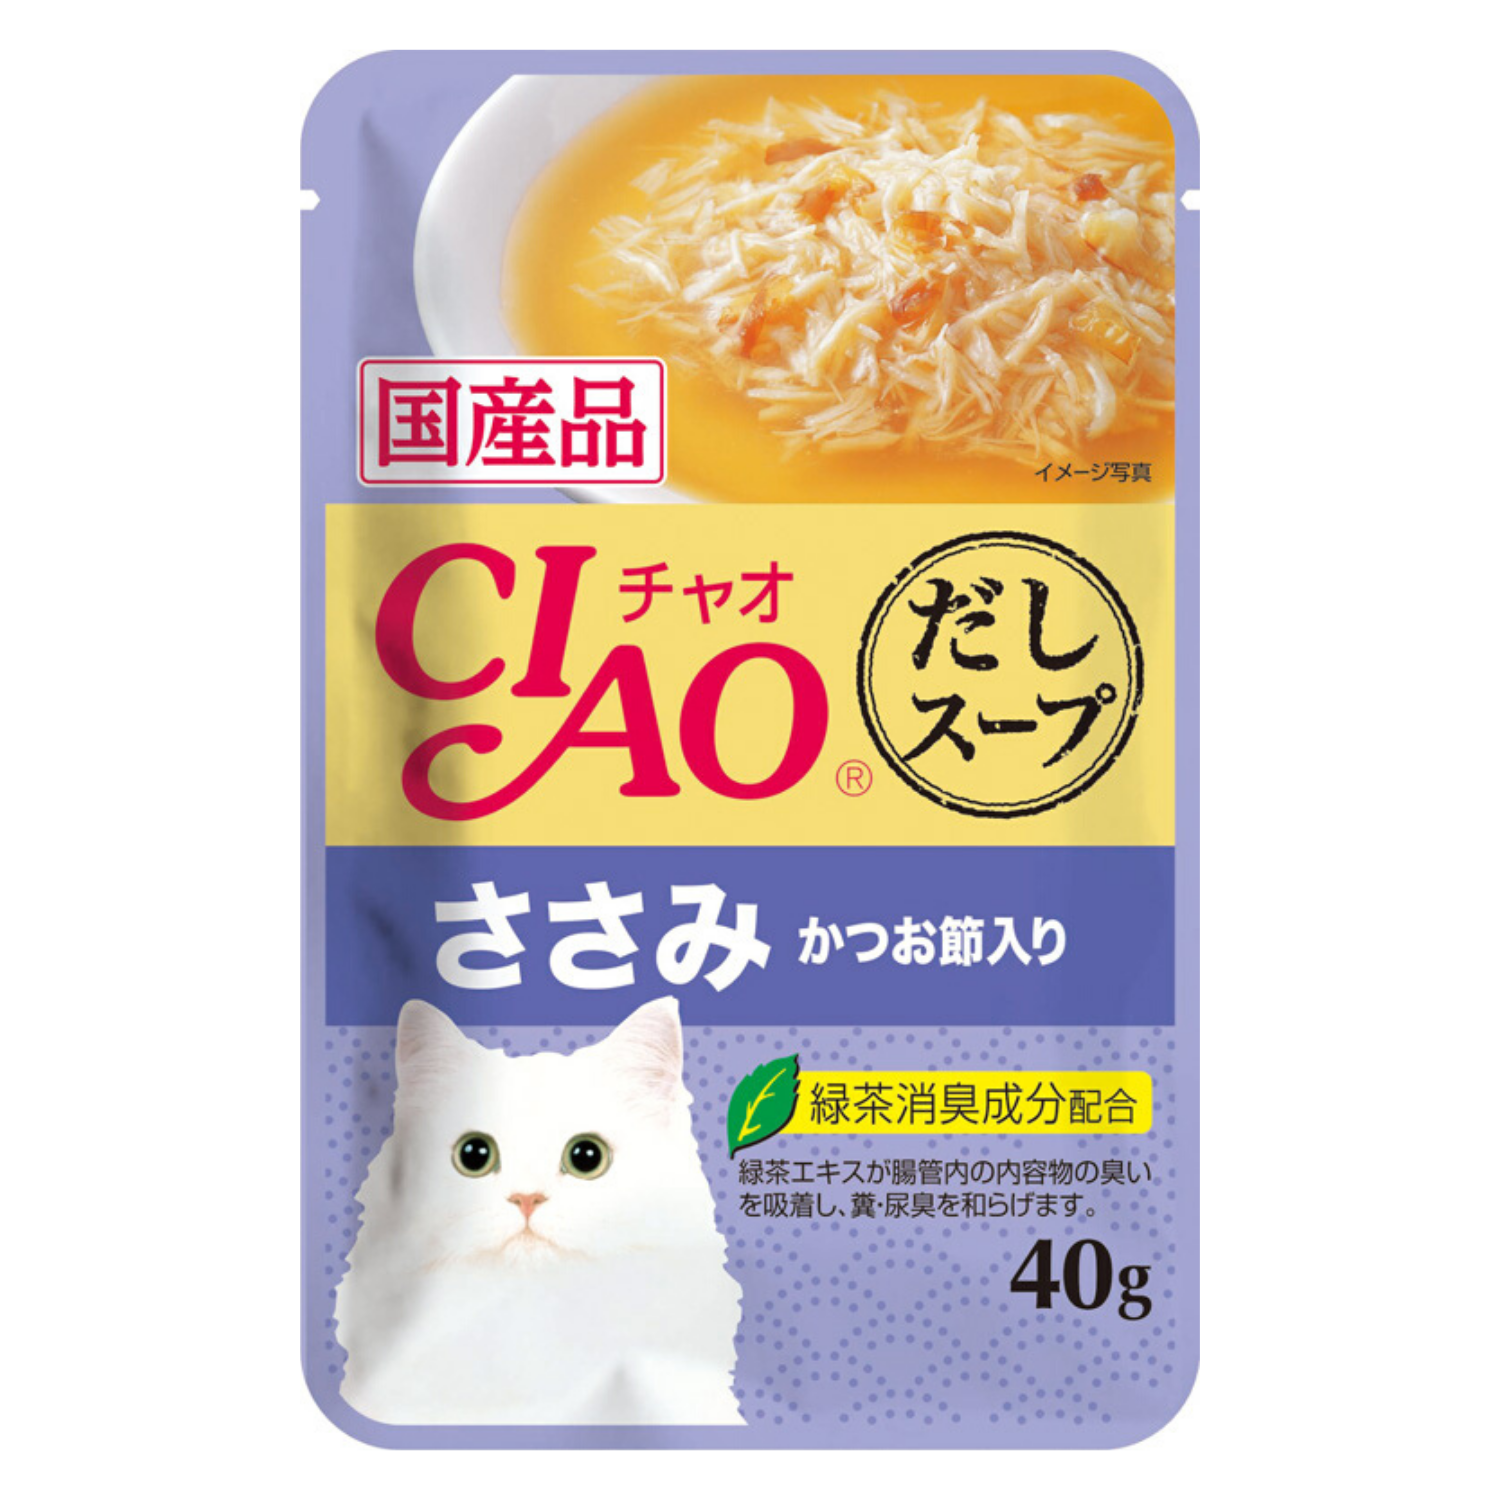 Ciao Clear Soup Pouch Chicken Fillet with Dried Bonito Topping - 40g